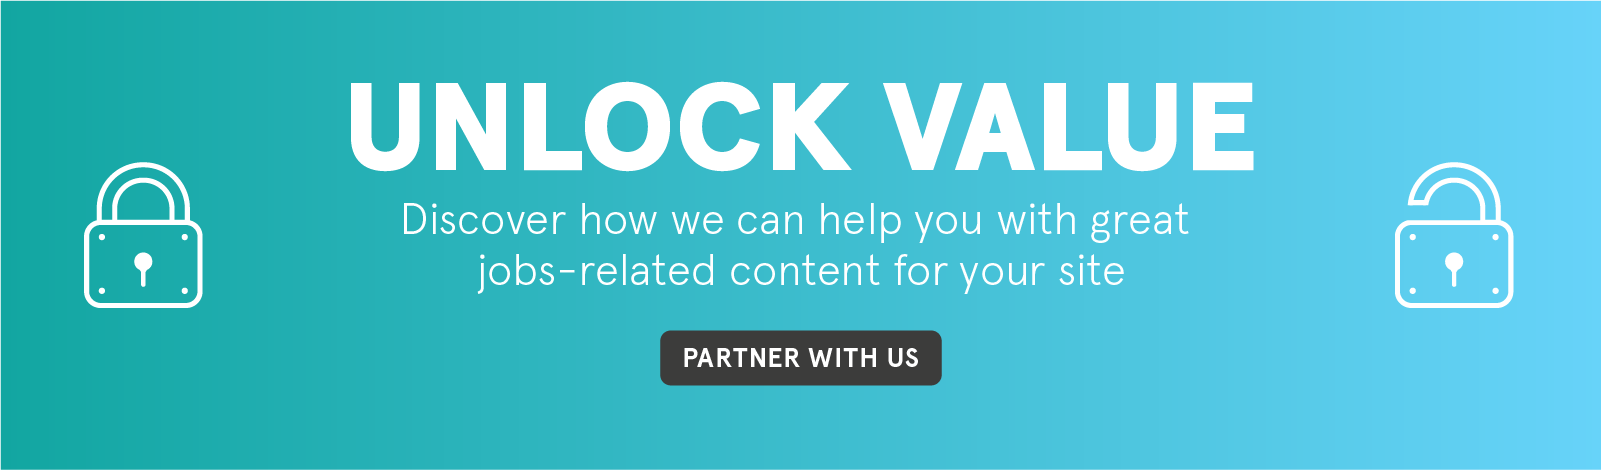 Unlock value - contact us today